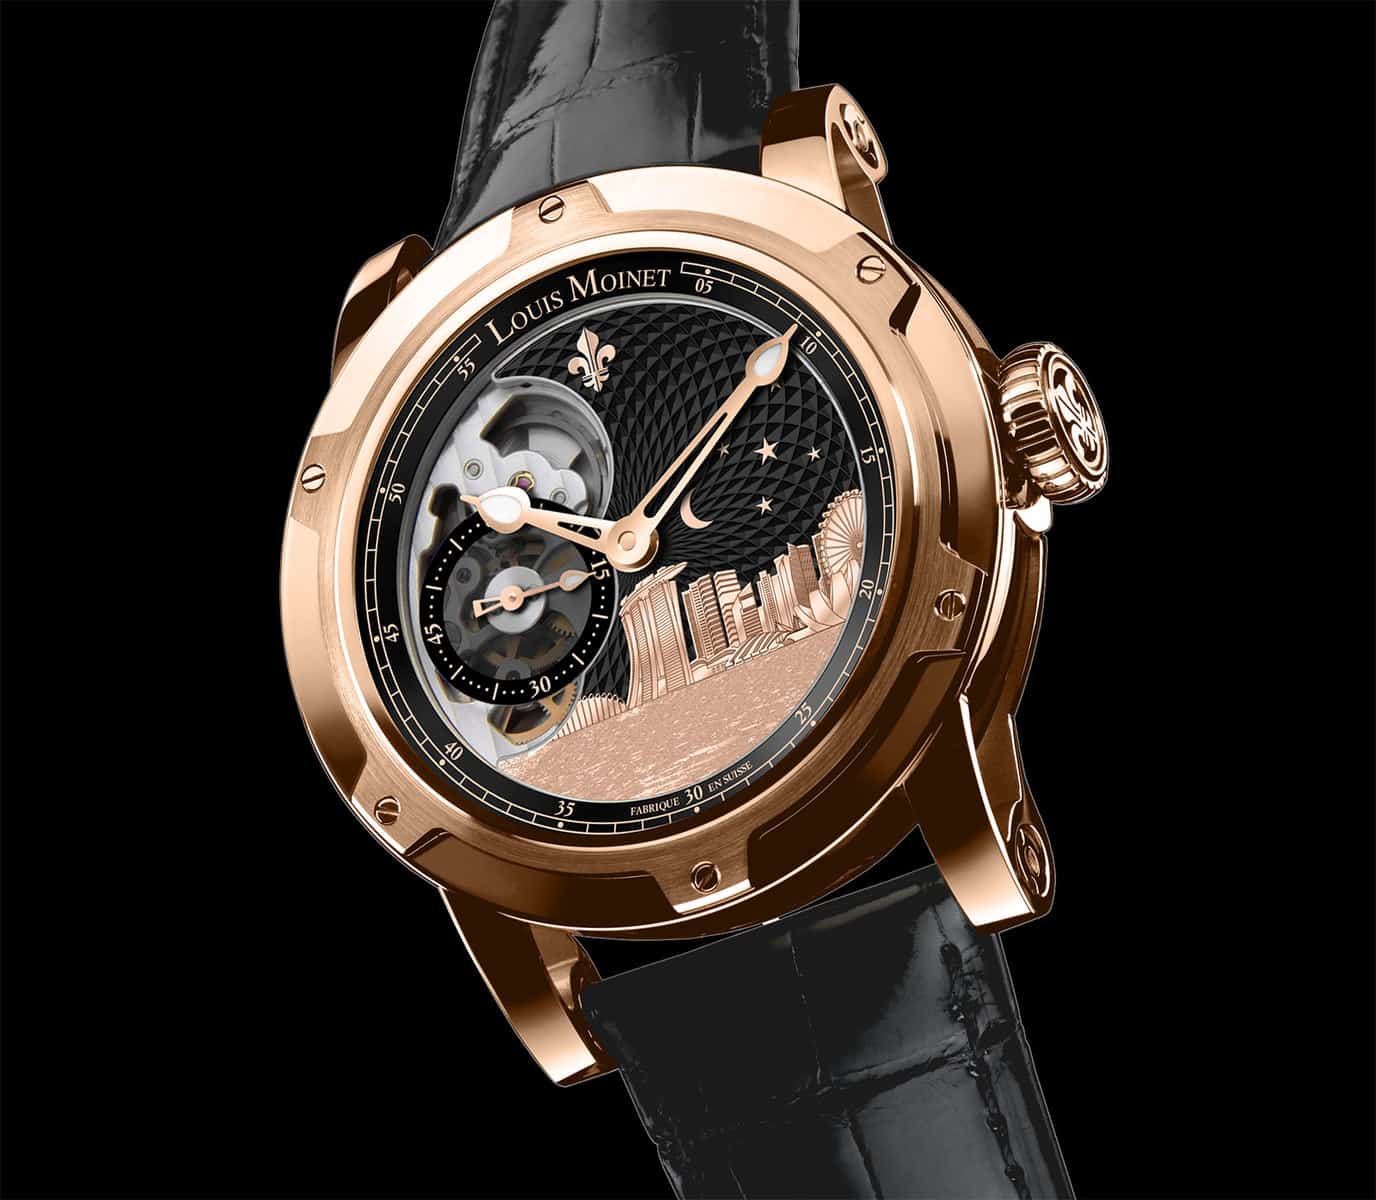 The Louis Moinet Singapore Edition Honors The City's Skyline